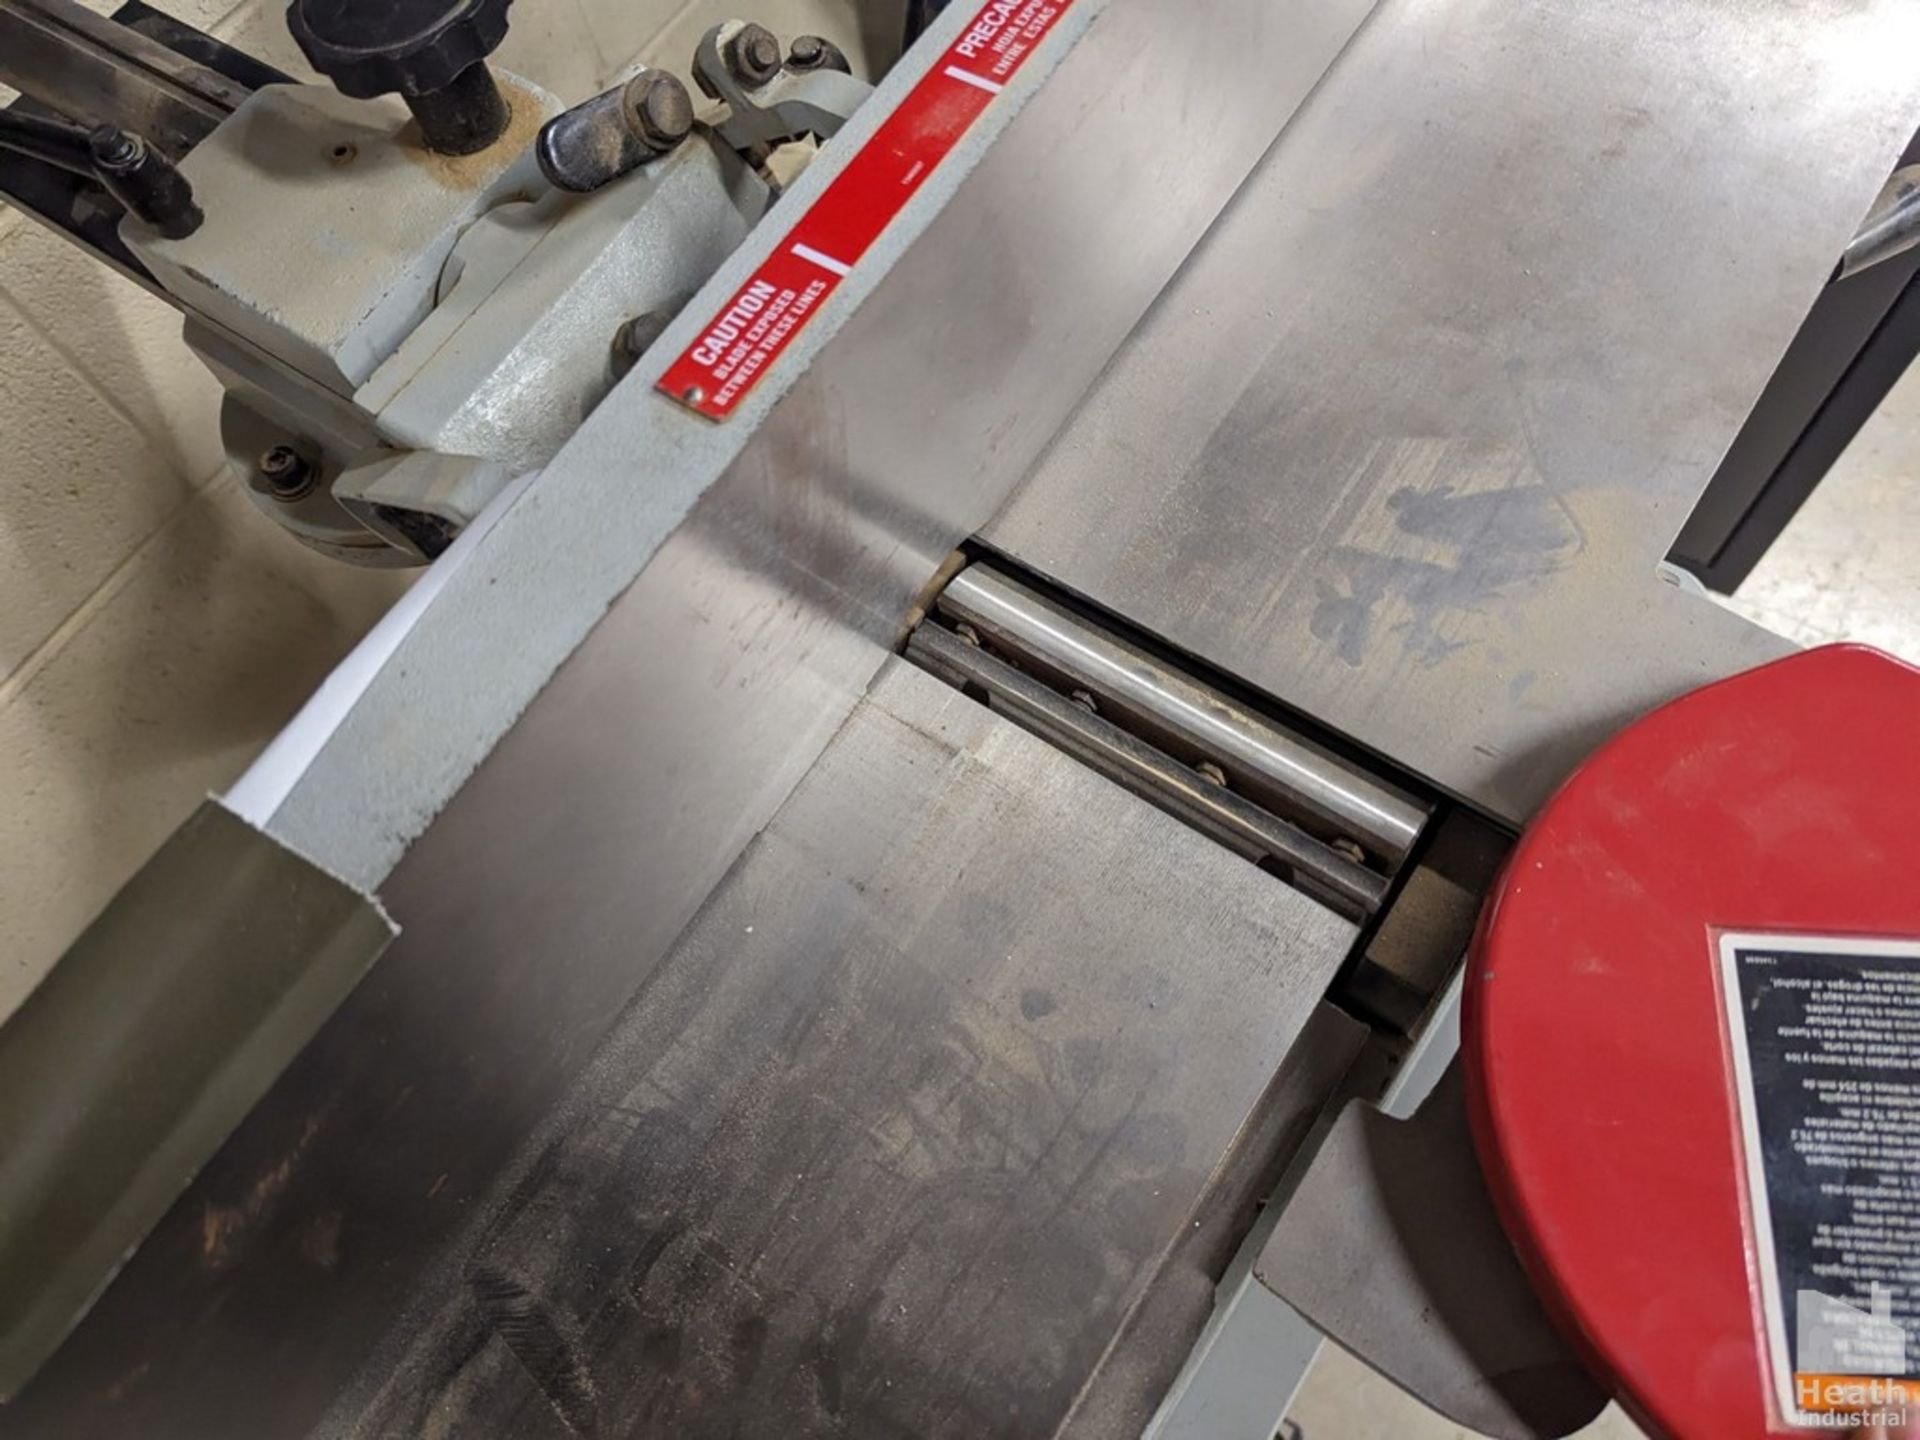 DELTA MODEL 37-866 6" JOINTER S/N 010923W3021 WITH MOBLE BASE Loading Fee :$125 - Image 2 of 5